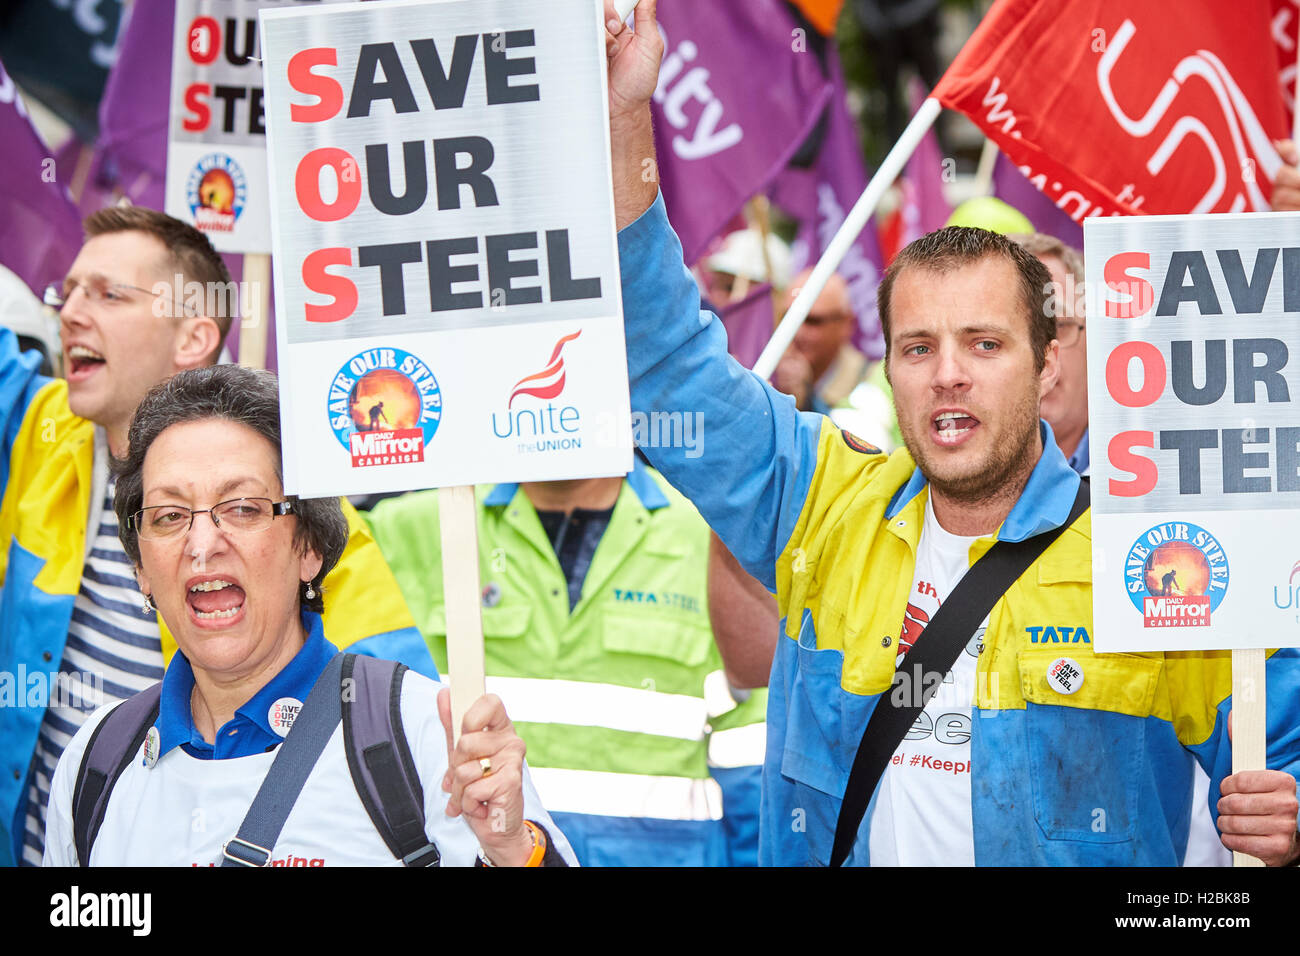 Tata steel protest in London calling on the government to save the steel industry Stock Photo